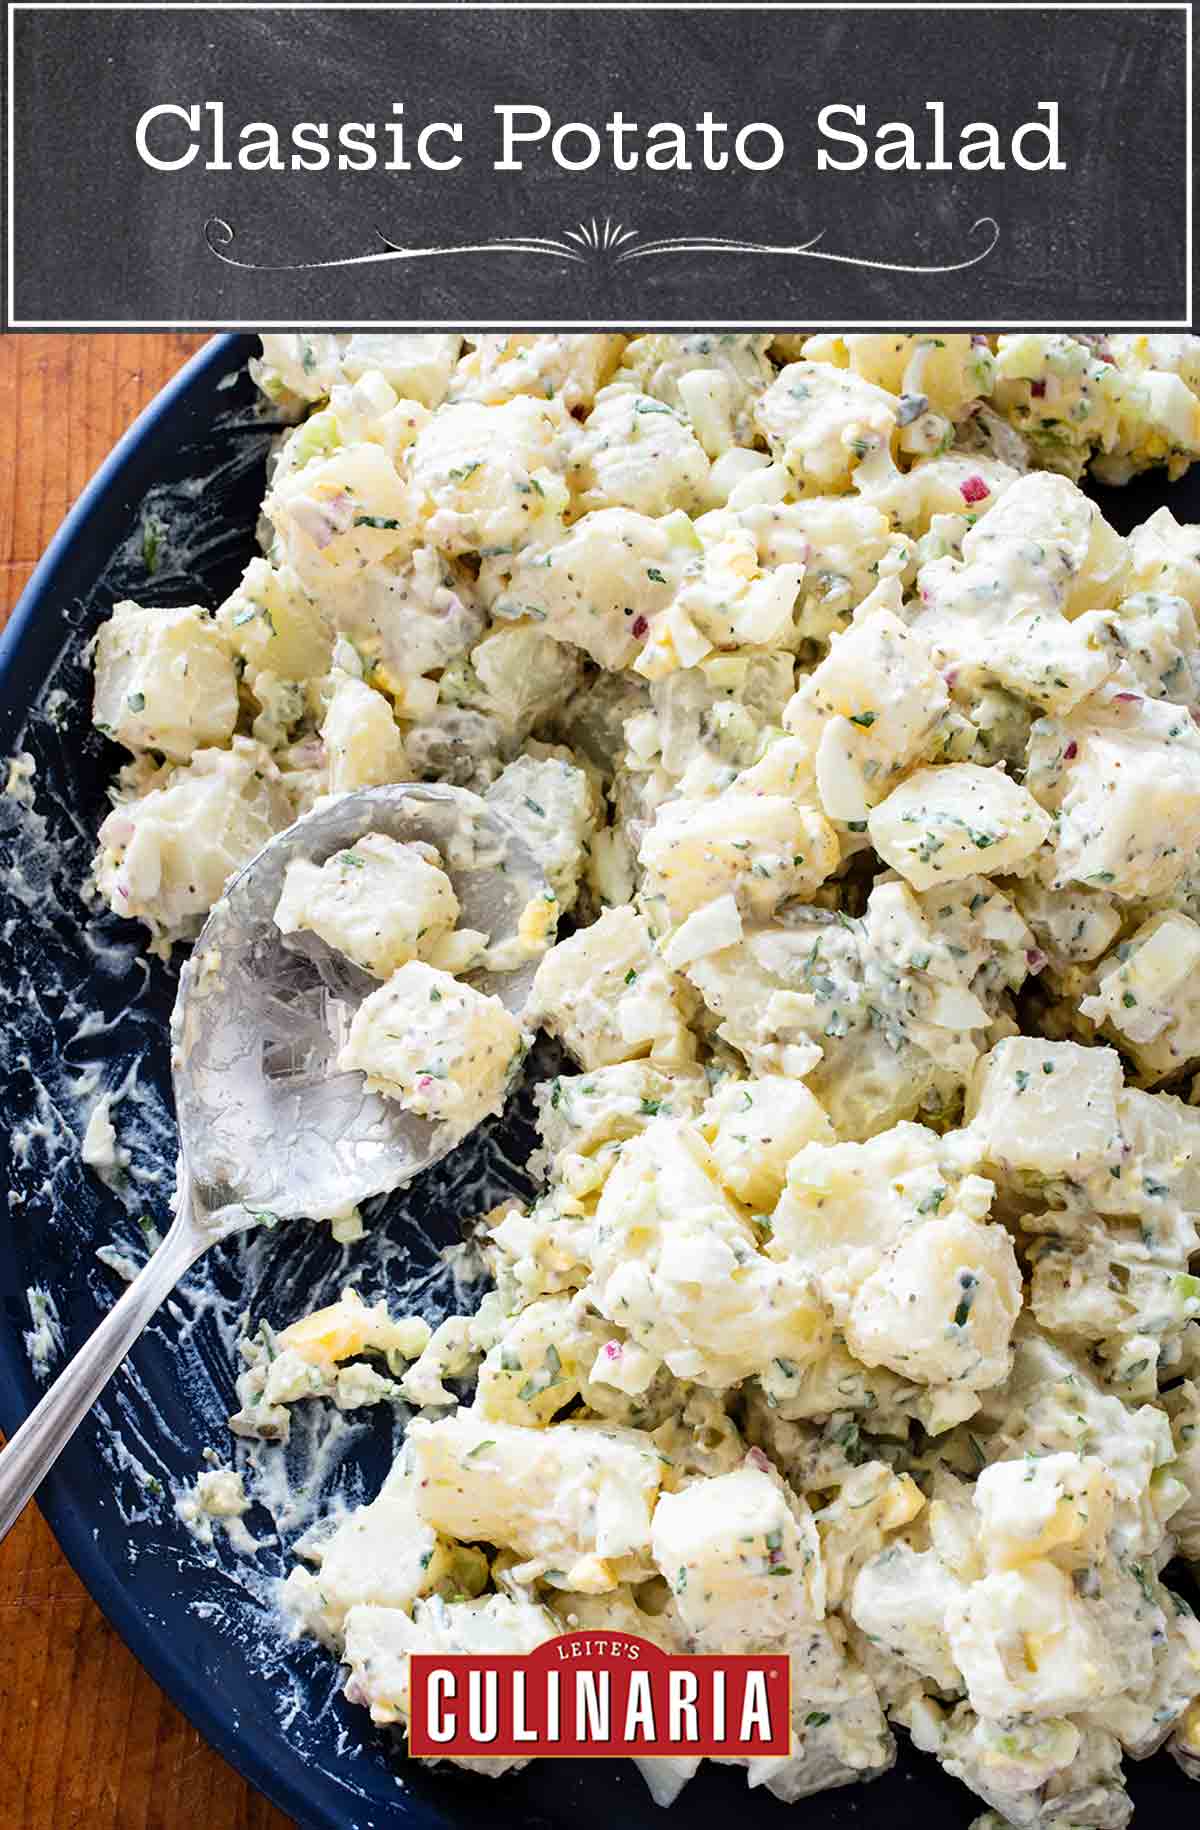 A blue bowl full of creamy potato salad with hardboiled eggs and a large spoon.